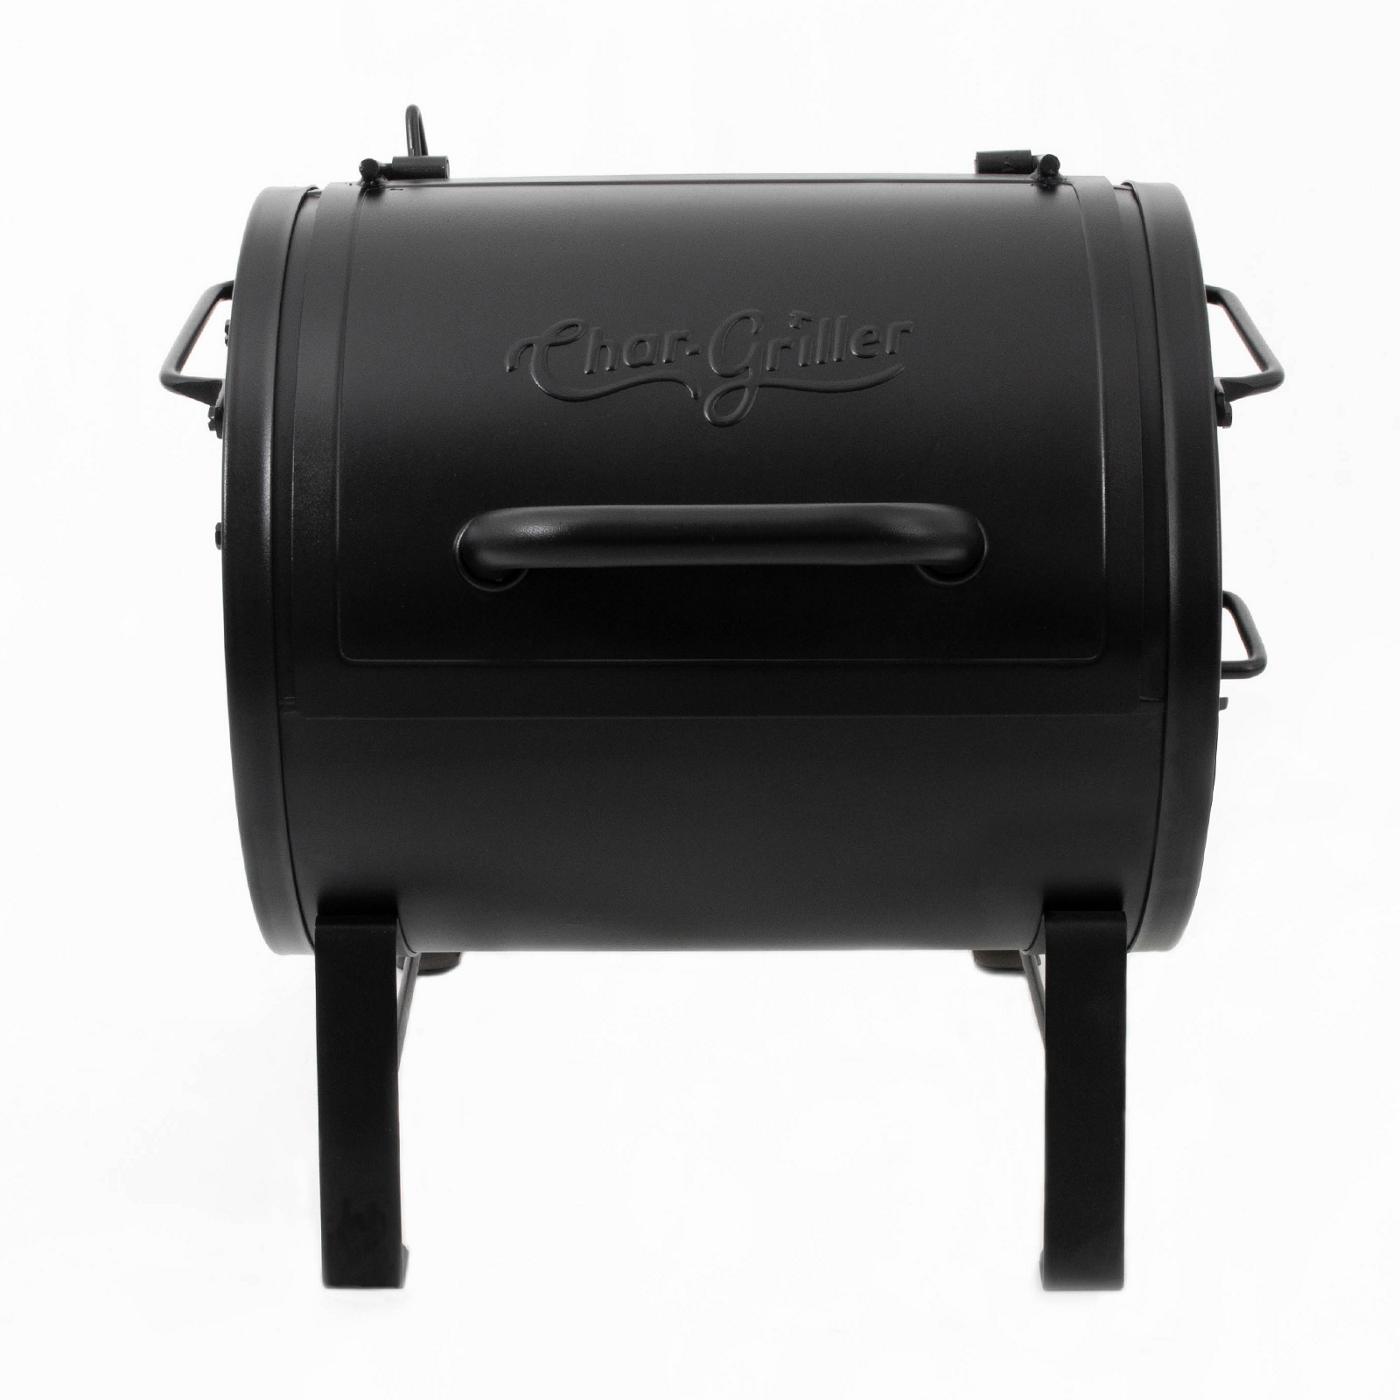 Char-Griller Portable Charcoal Grill & Side Fire Box; image 1 of 5